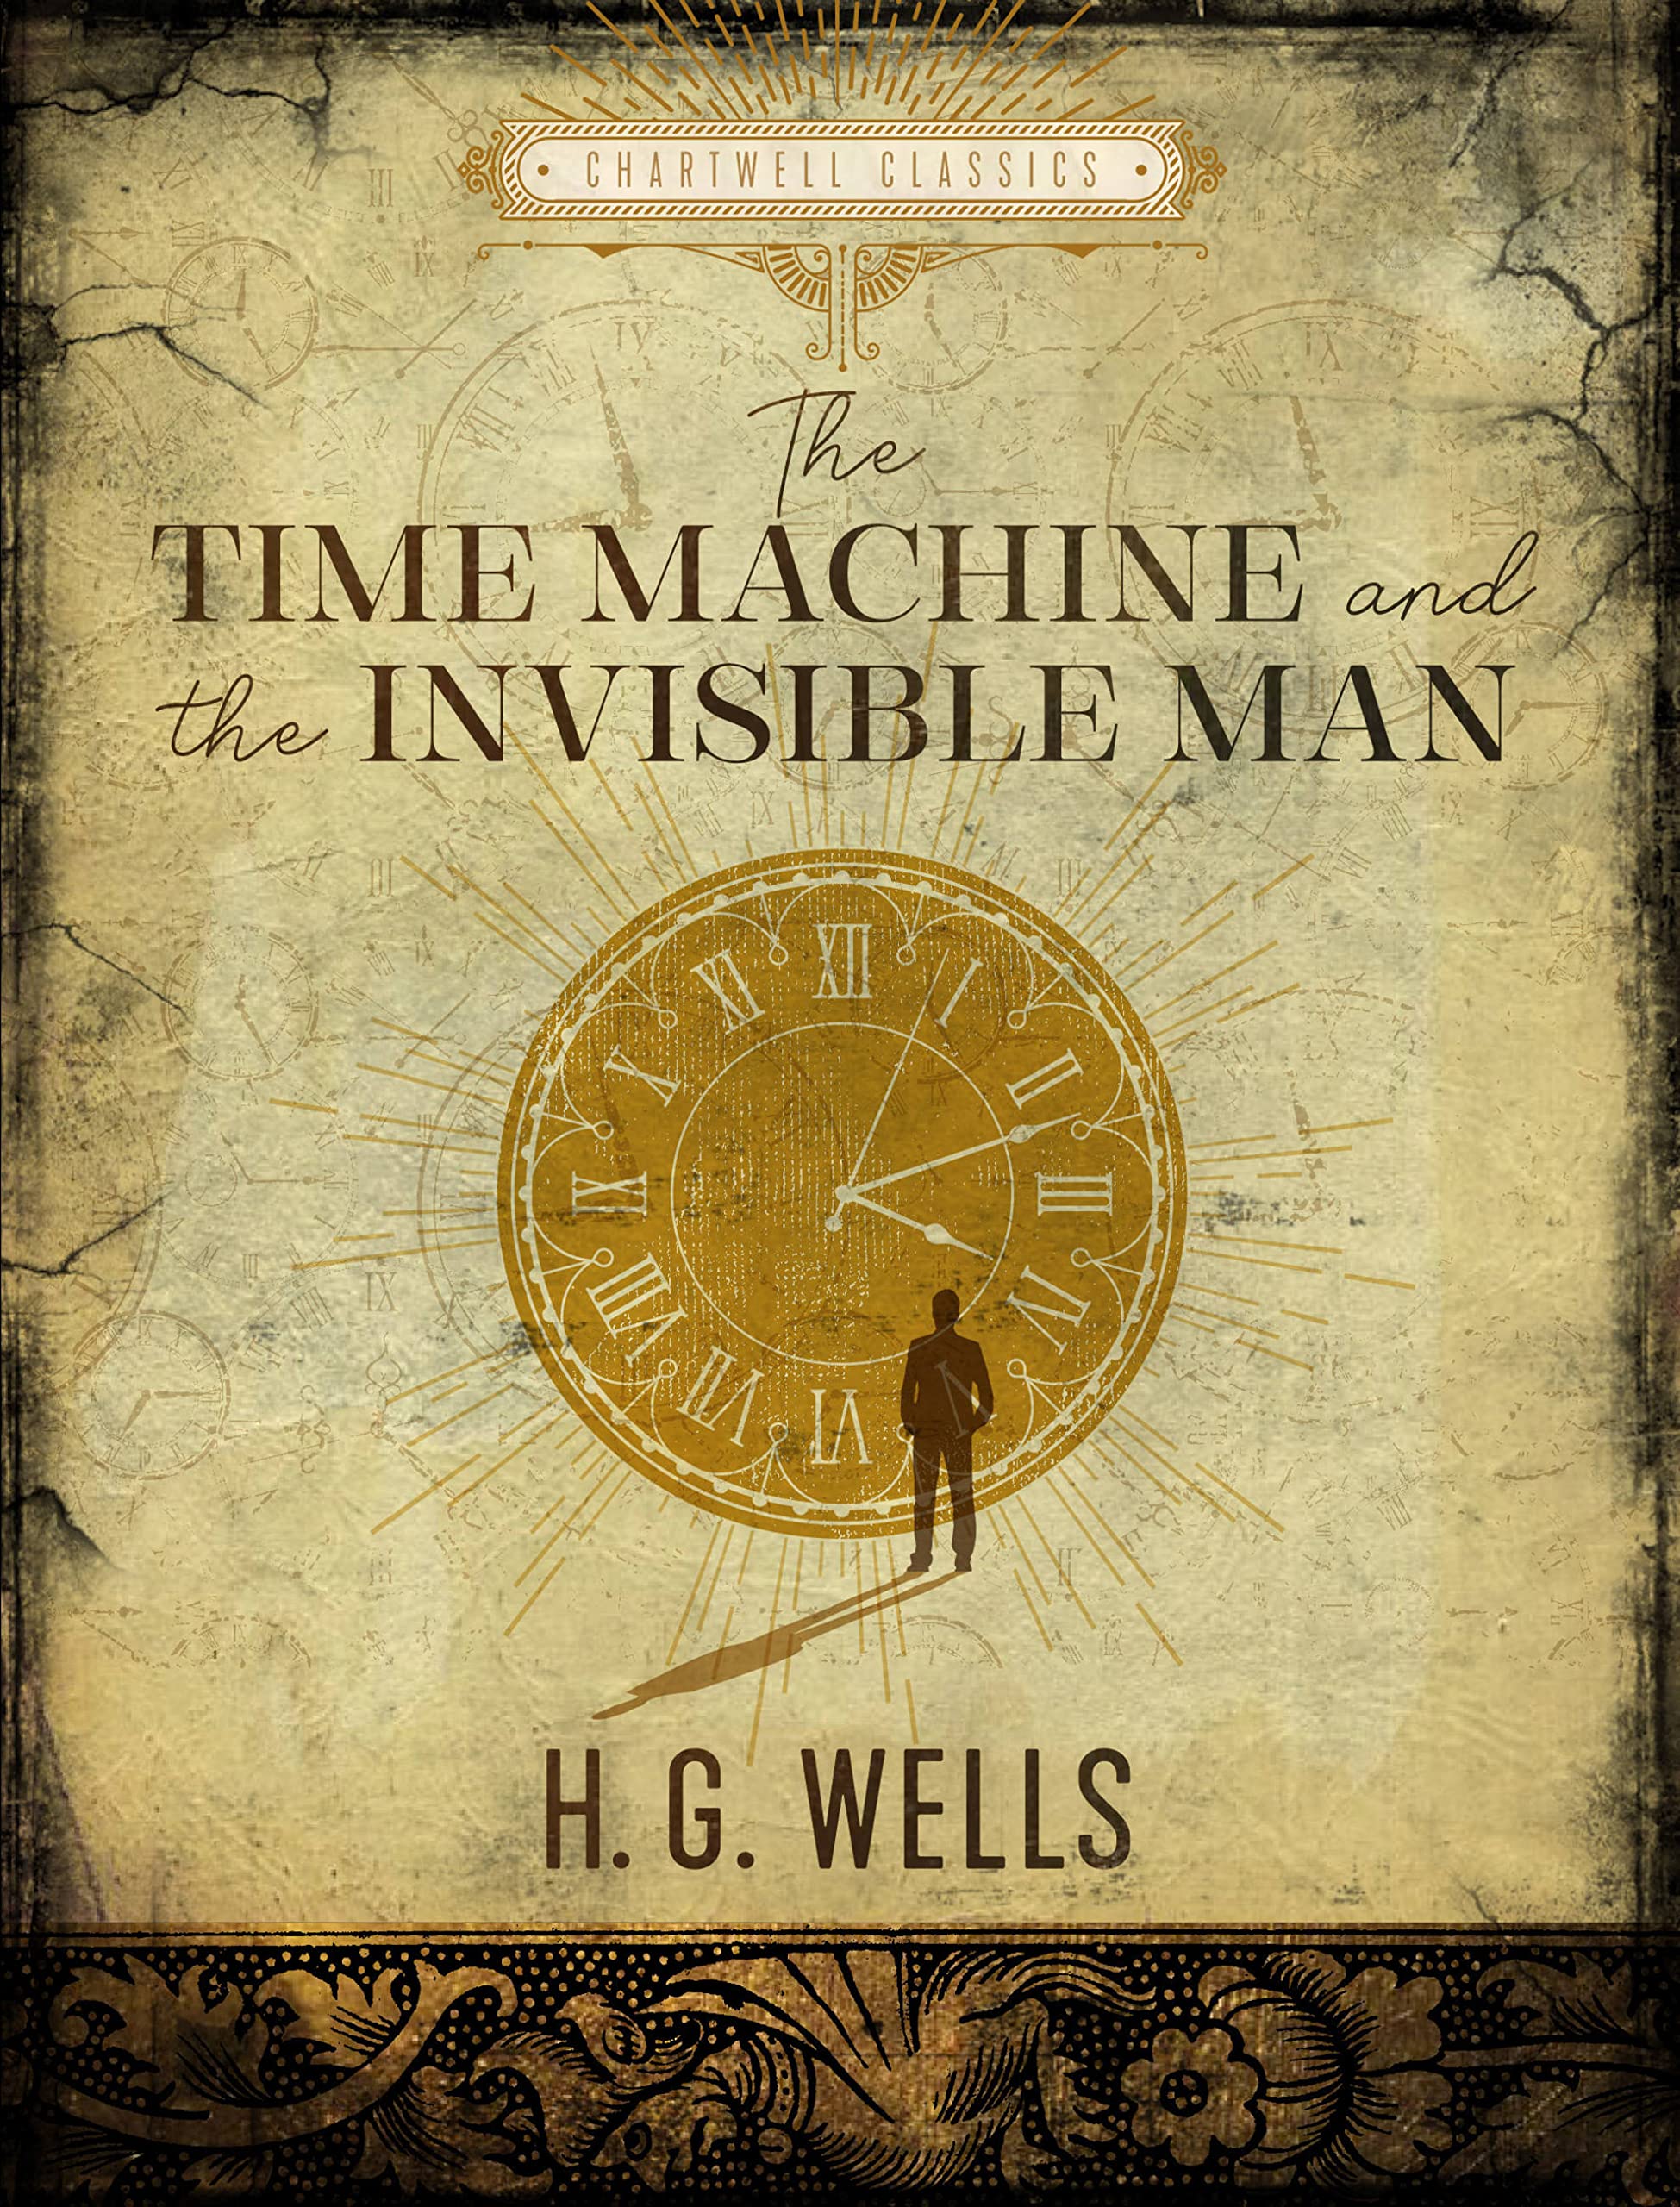 The Time Machine / The Invisible Man | H.G. Wells